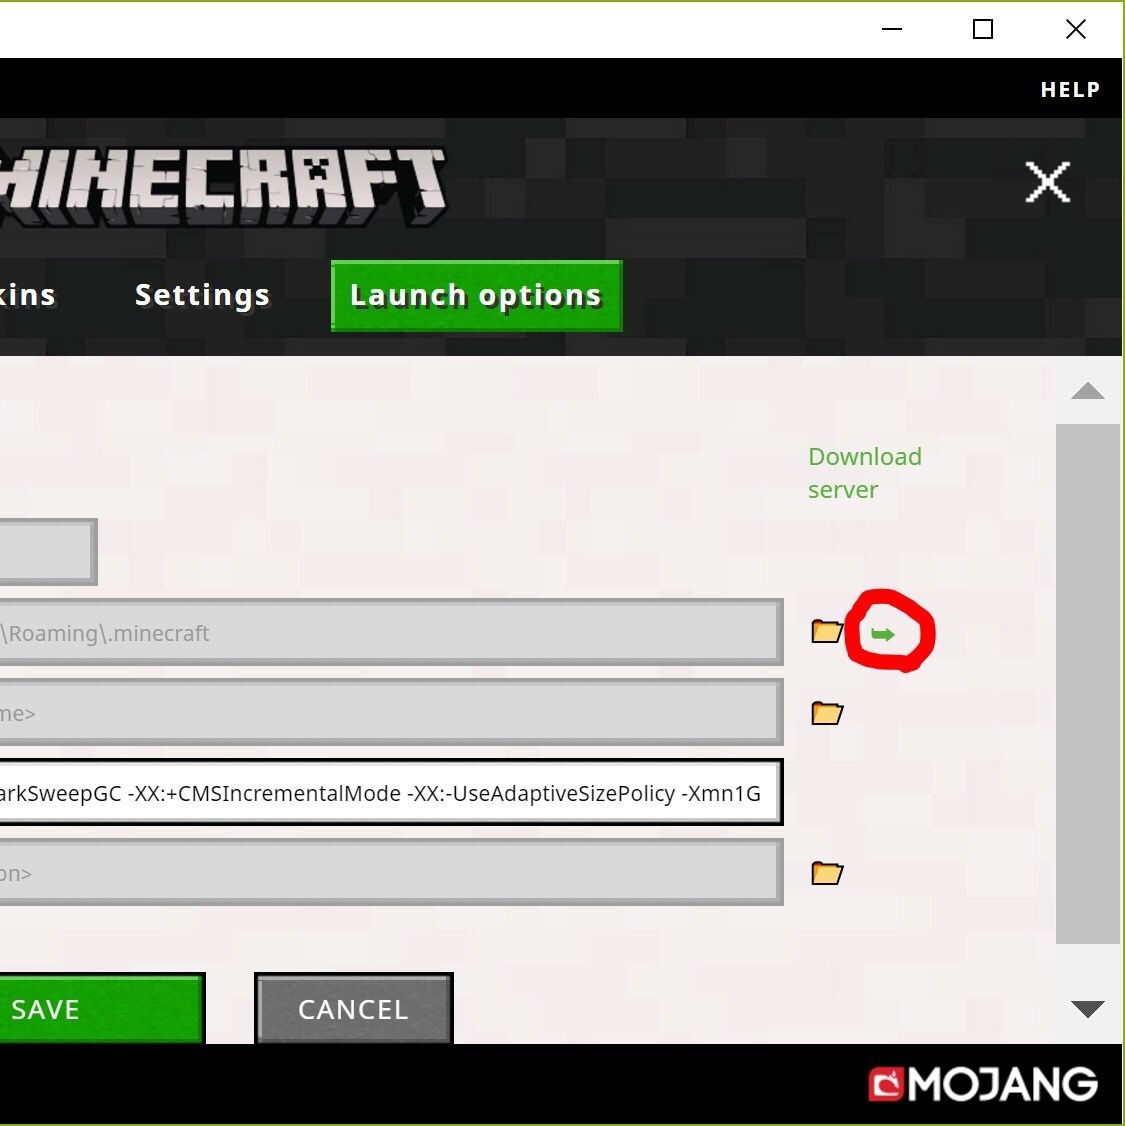 minecraft forge directory is missing a launcher profile